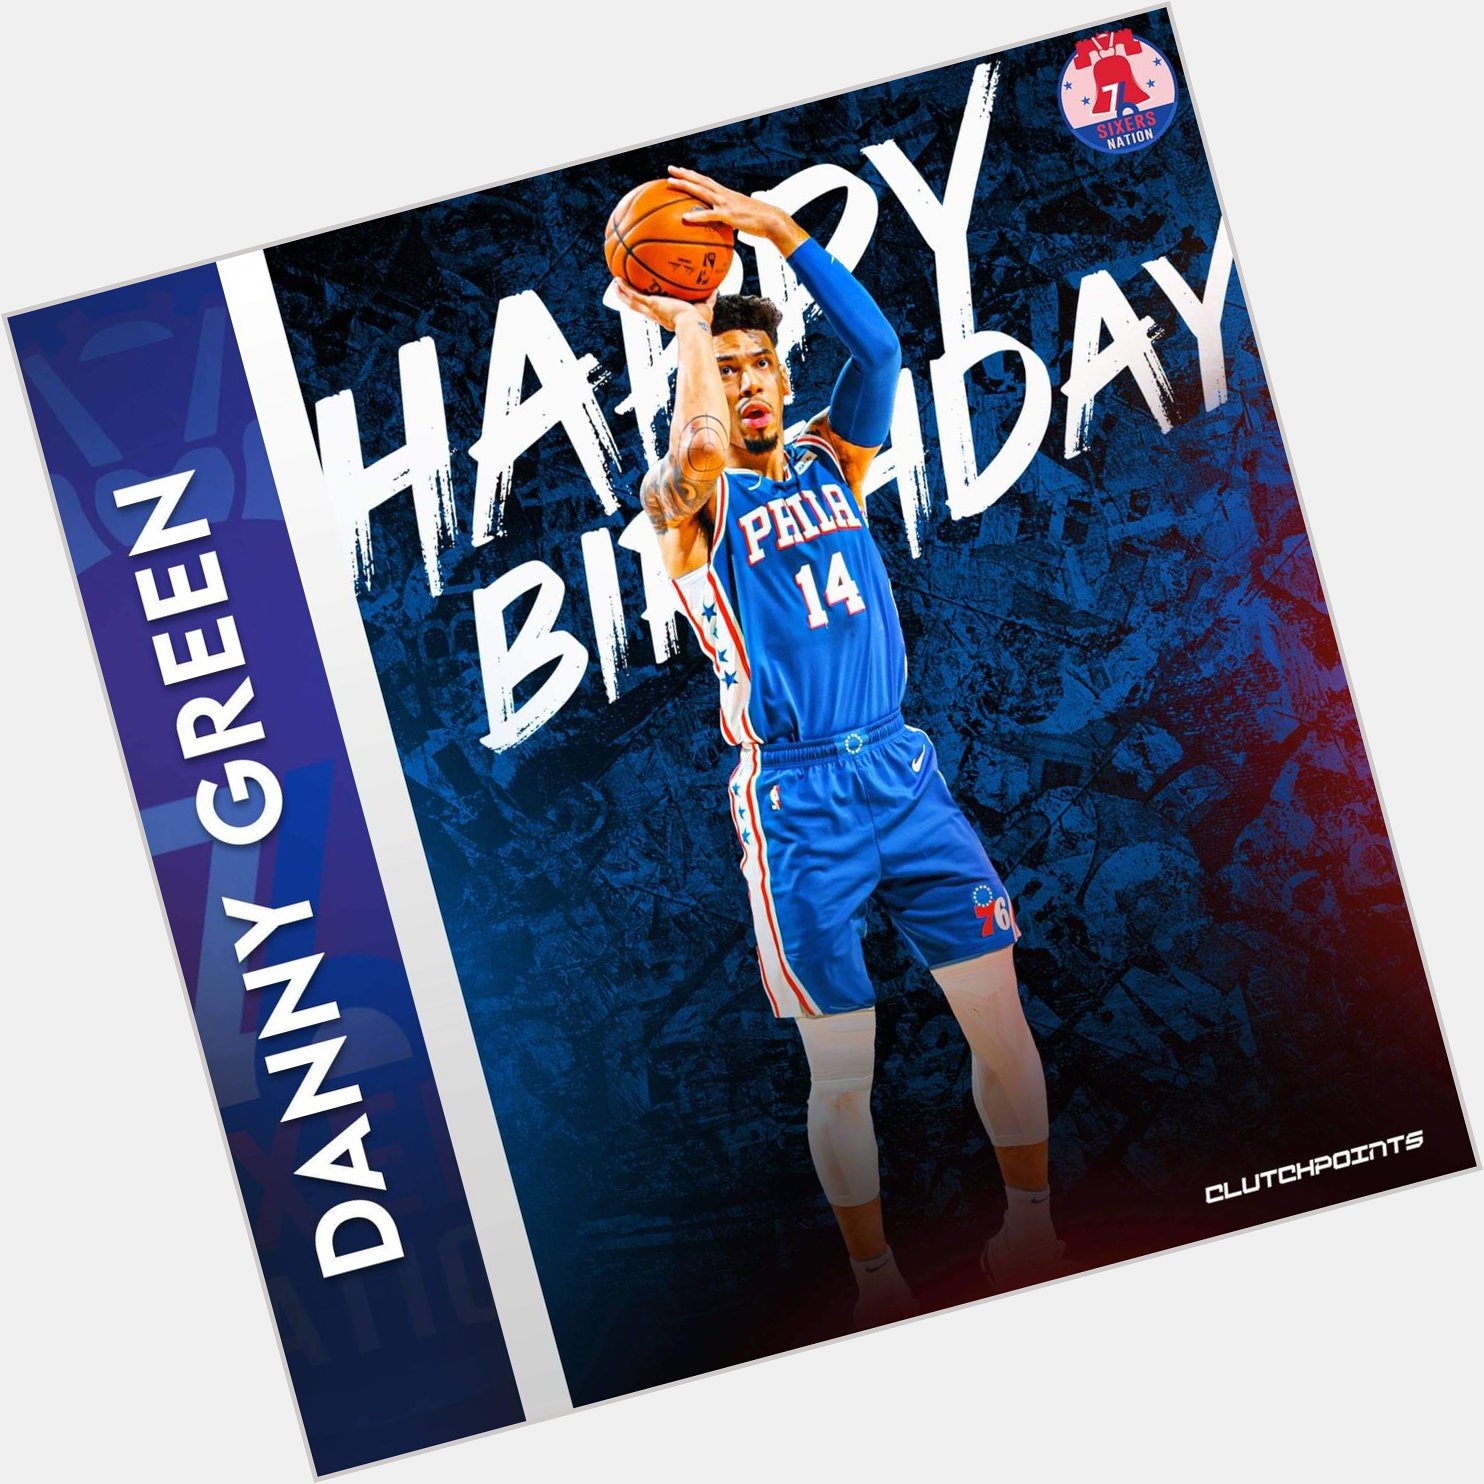 Join Sixers Nation in wishing 3x NBA Champion, Danny Green, a happy 34th birthday!  